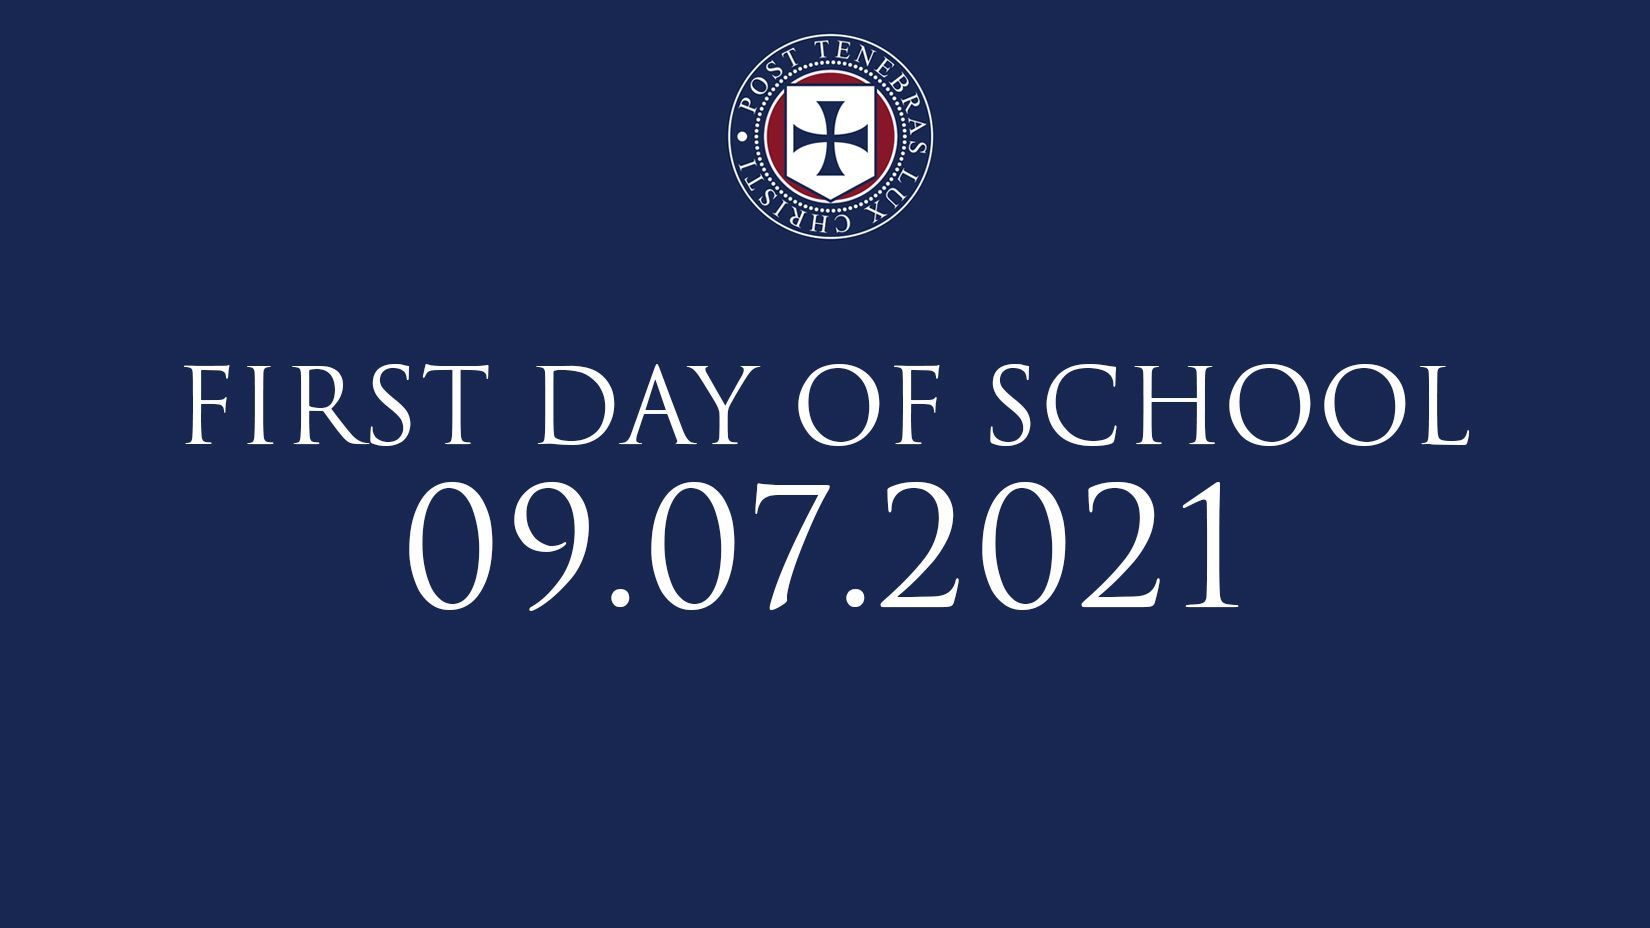 First day of School is September 7th!